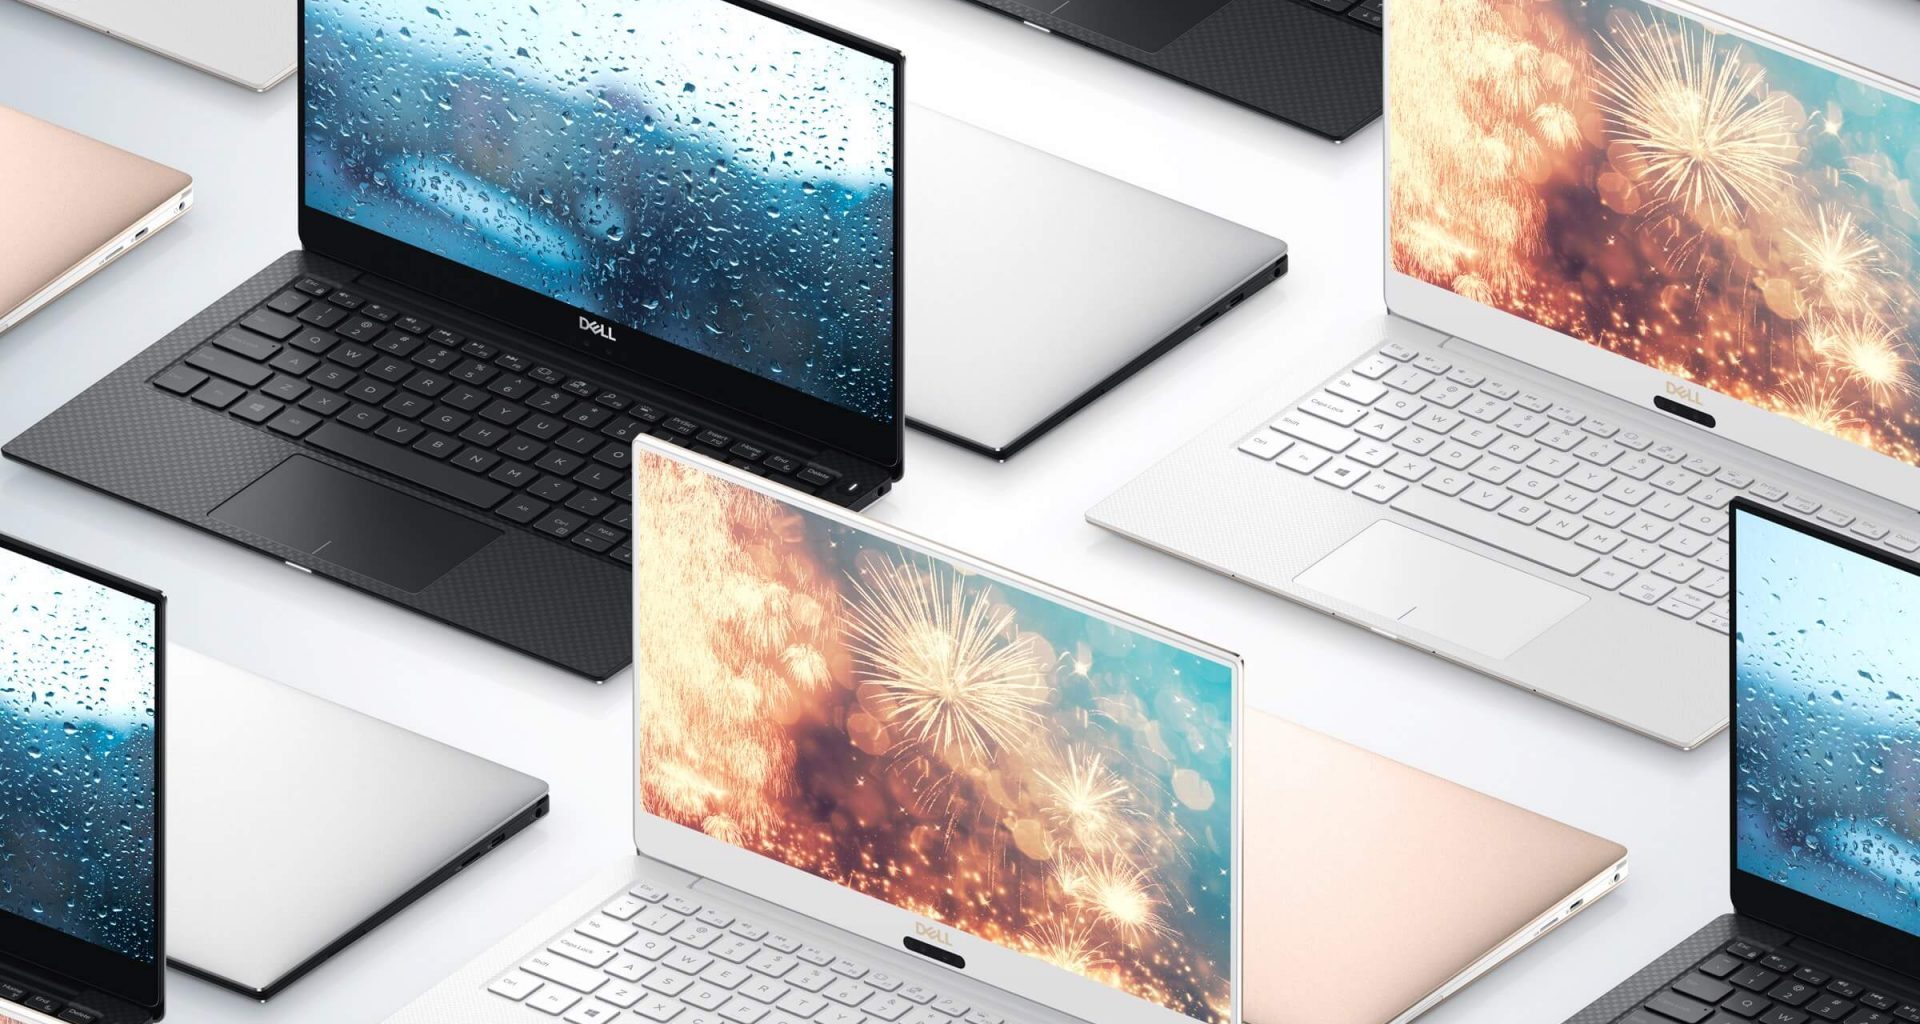 Dell xps 13 pattern image